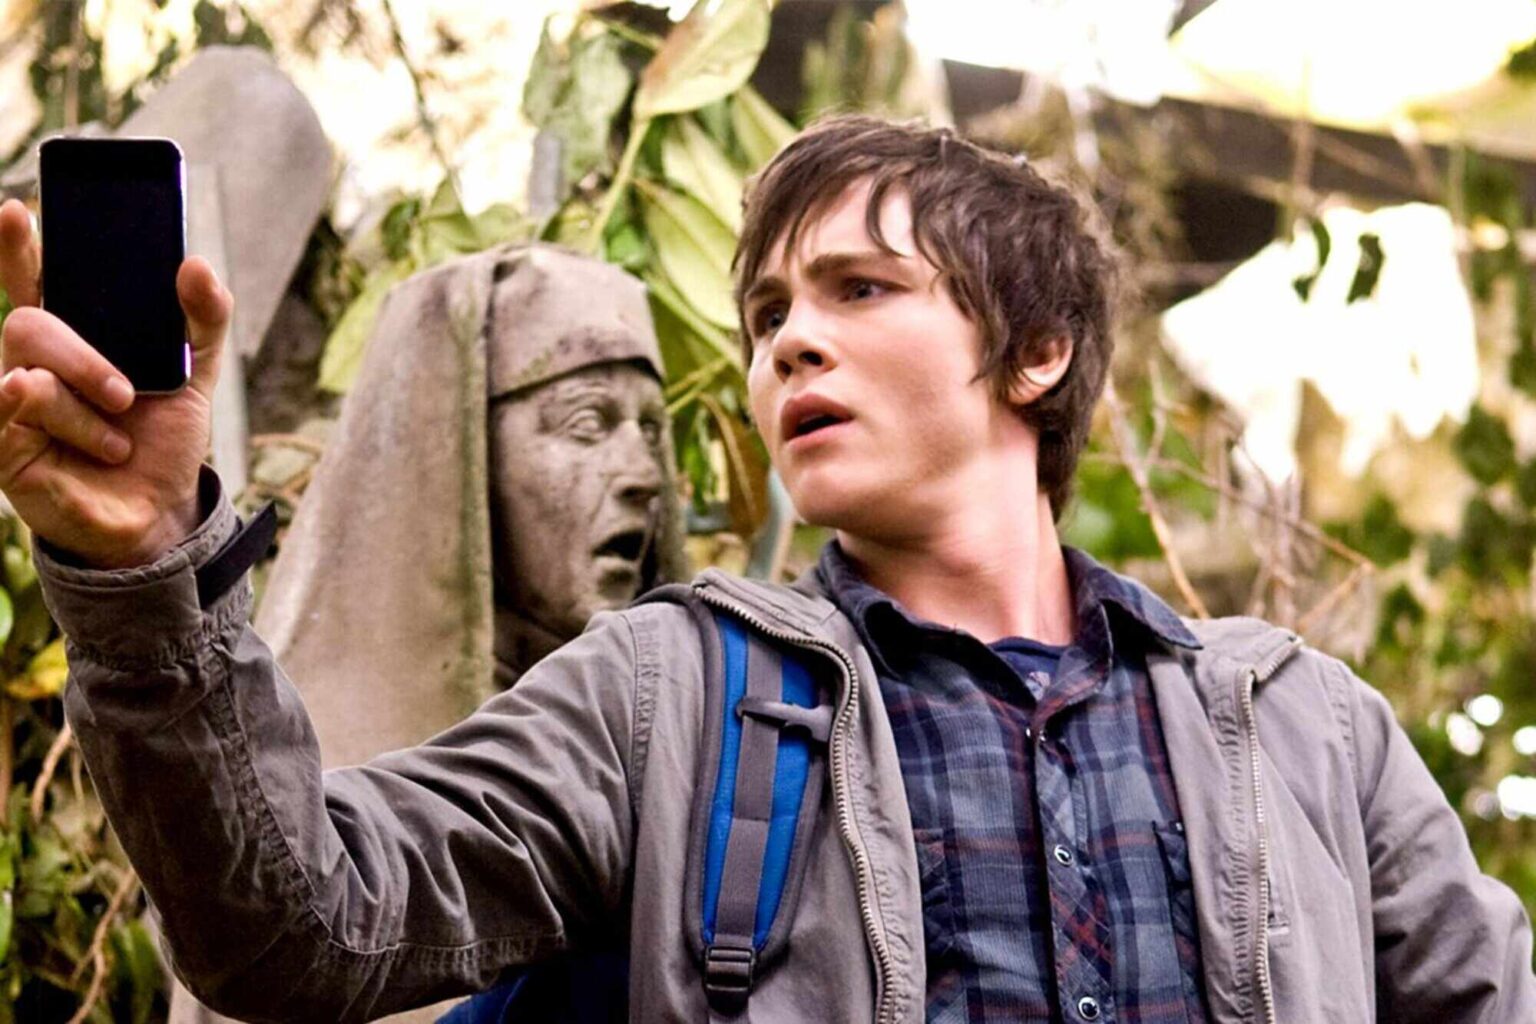 Will Logan Lerman return in his iconic role in the upcoming 'Percy Jackson' TV series? Check out all the show's updates so far from author Rick Riordan.